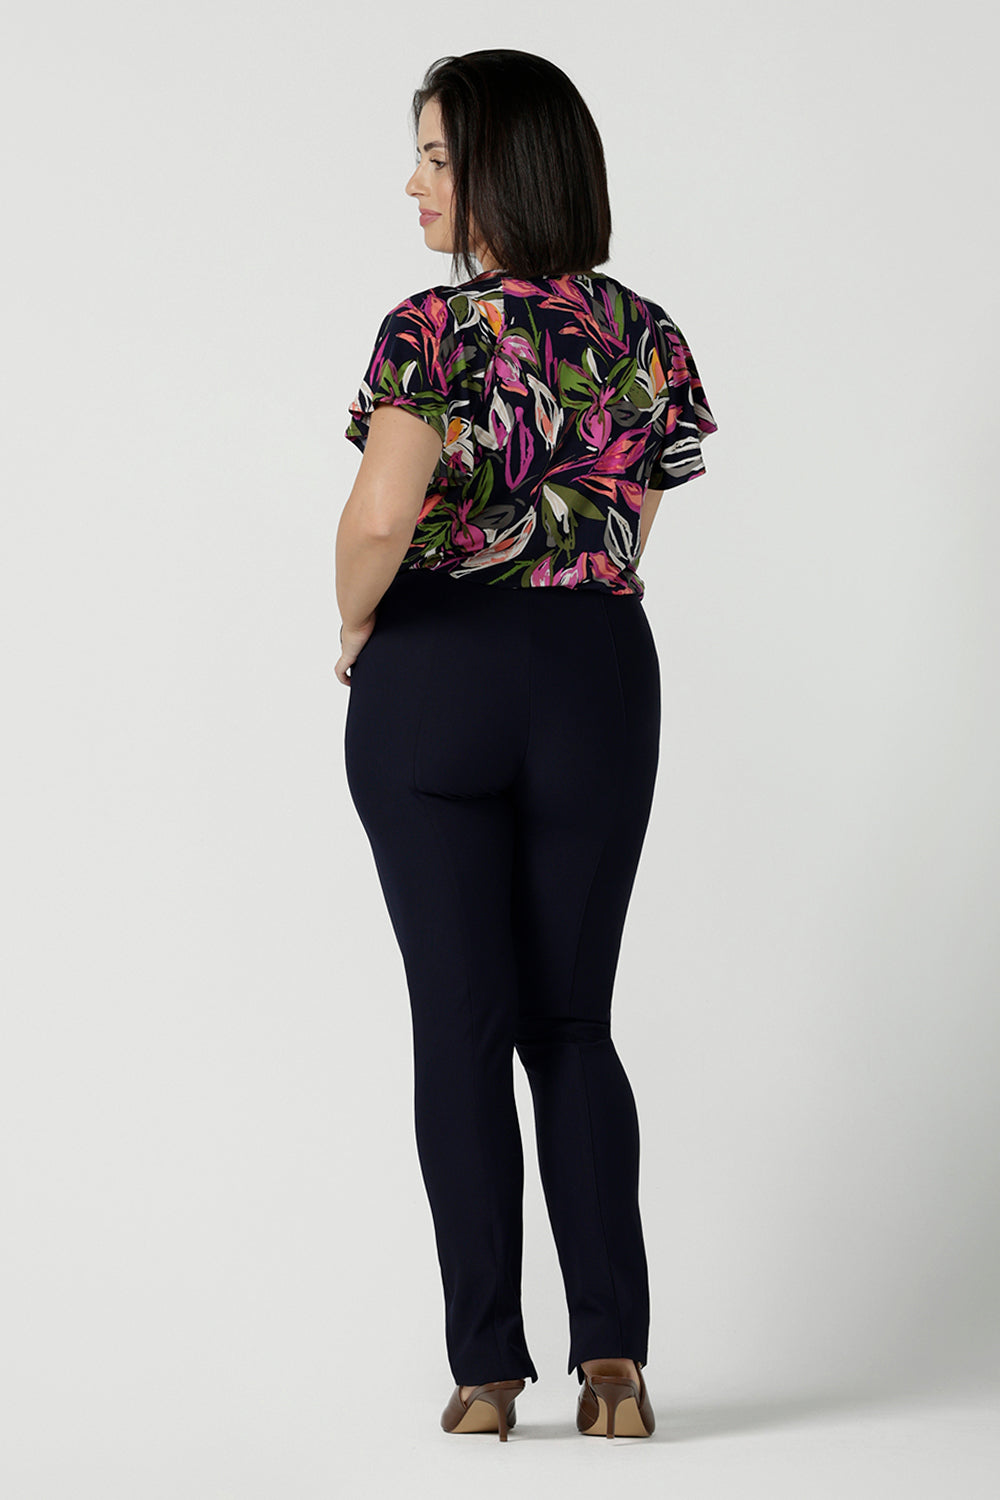 Back view of a size 10 woman wears the Bowie top in Vivid Flora with a raglan flutter sleeve, pleat front and v-neckline. Made in Australia for women size 8 - 24.